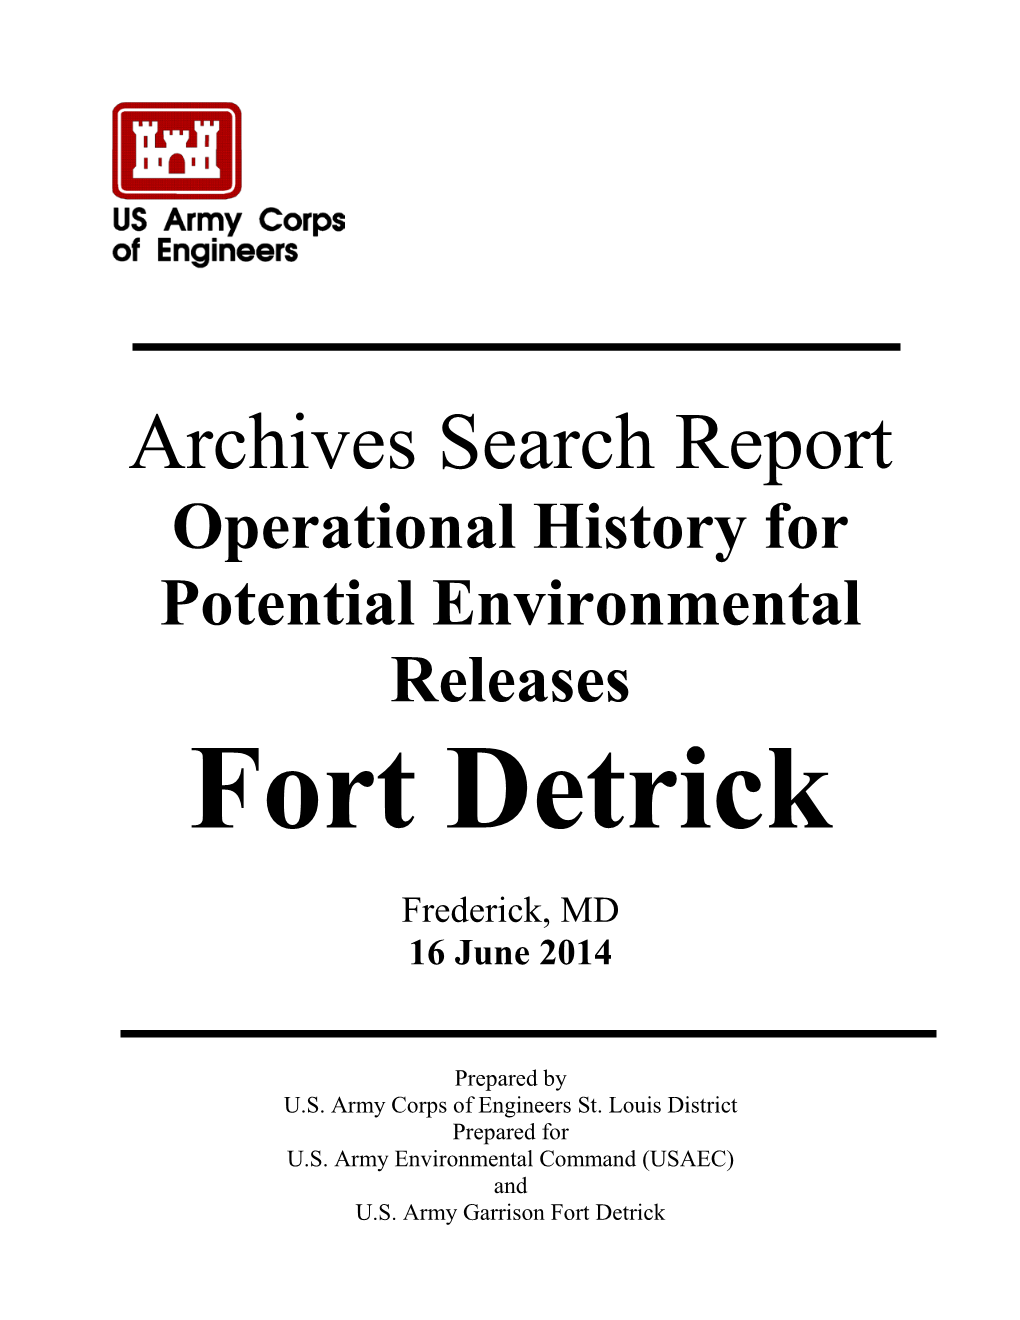 Archives Search Report Operational History for Potential Environmental Releases Fort Detrick